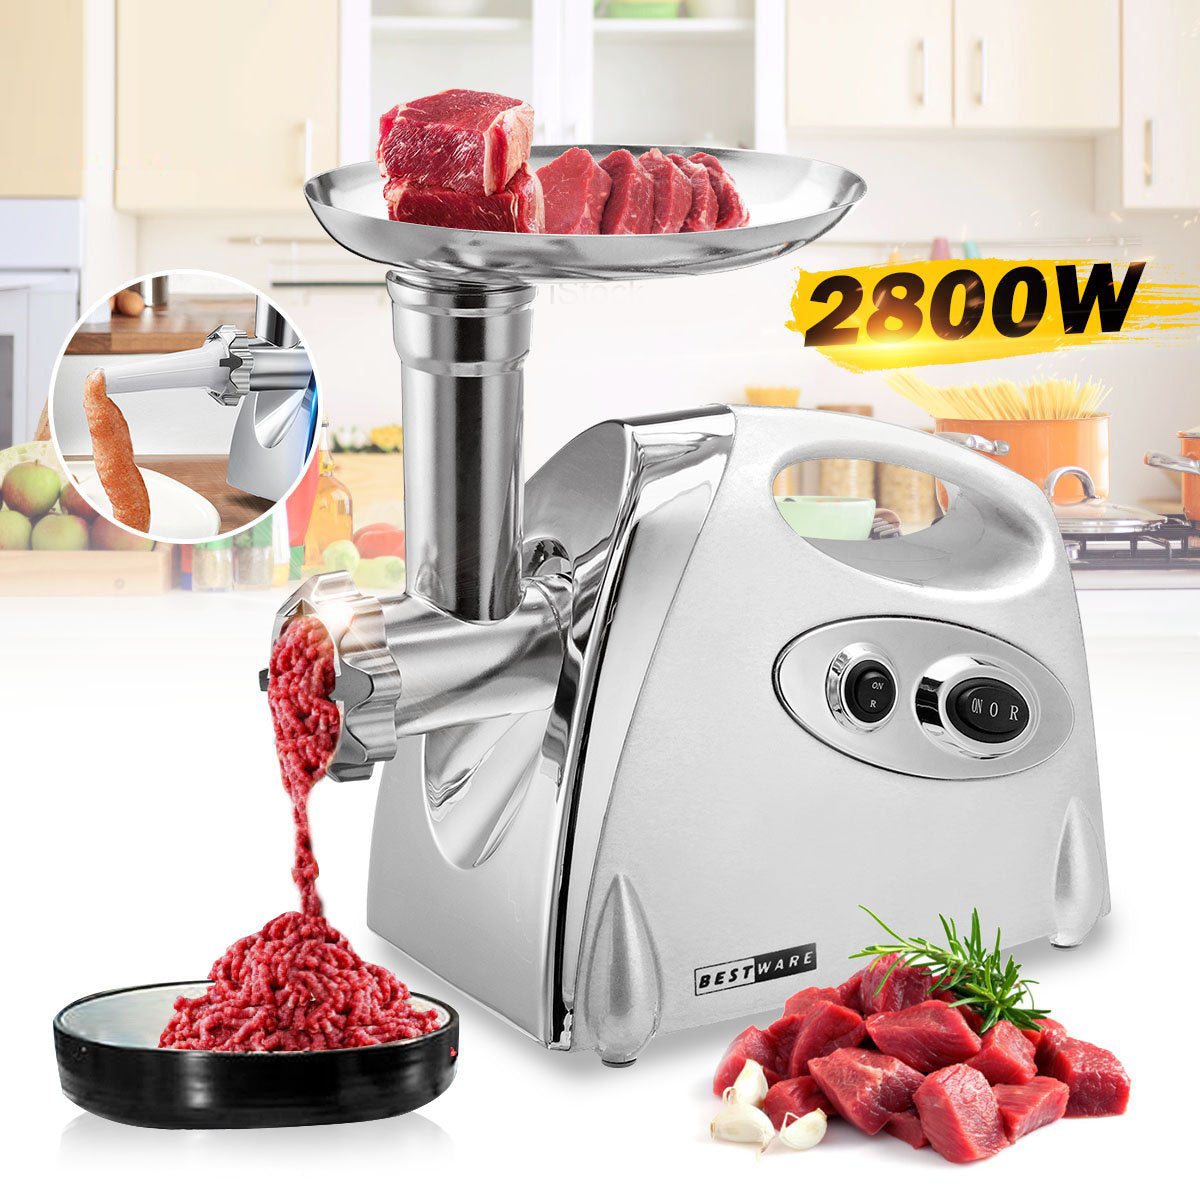 Ollygrin Meat Grinder Electric Stainless Steel, Meat Grinder Electric Sausage Stuffer, Meat Grinder Maker Heavy Duty 2800W Max with 2 Blades, 3 Plates